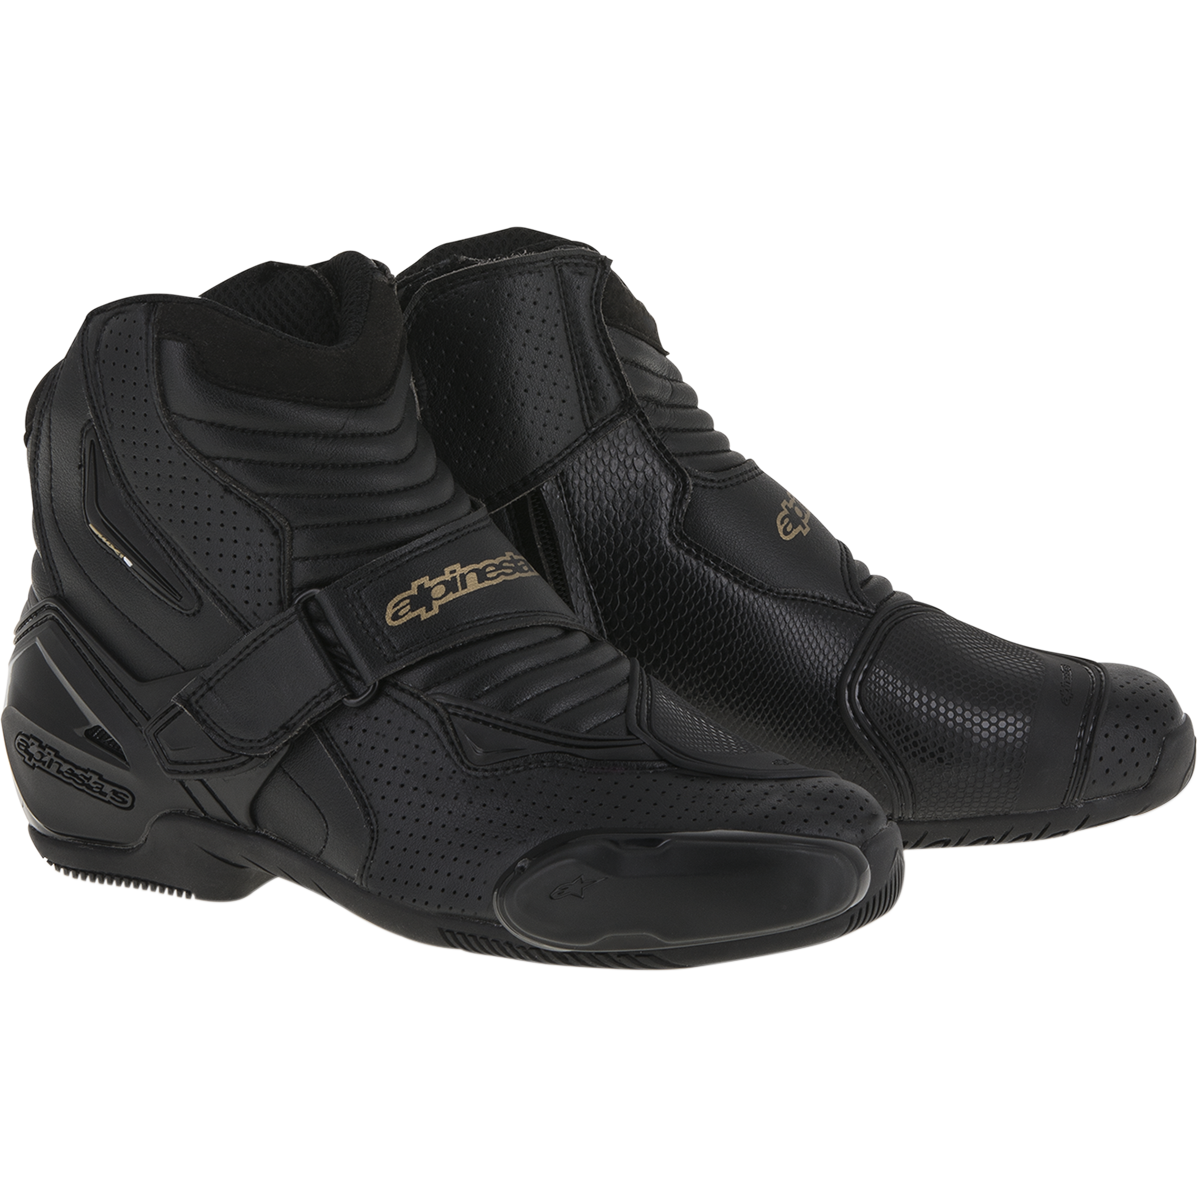 Stella Smx-1 R Vented Boots